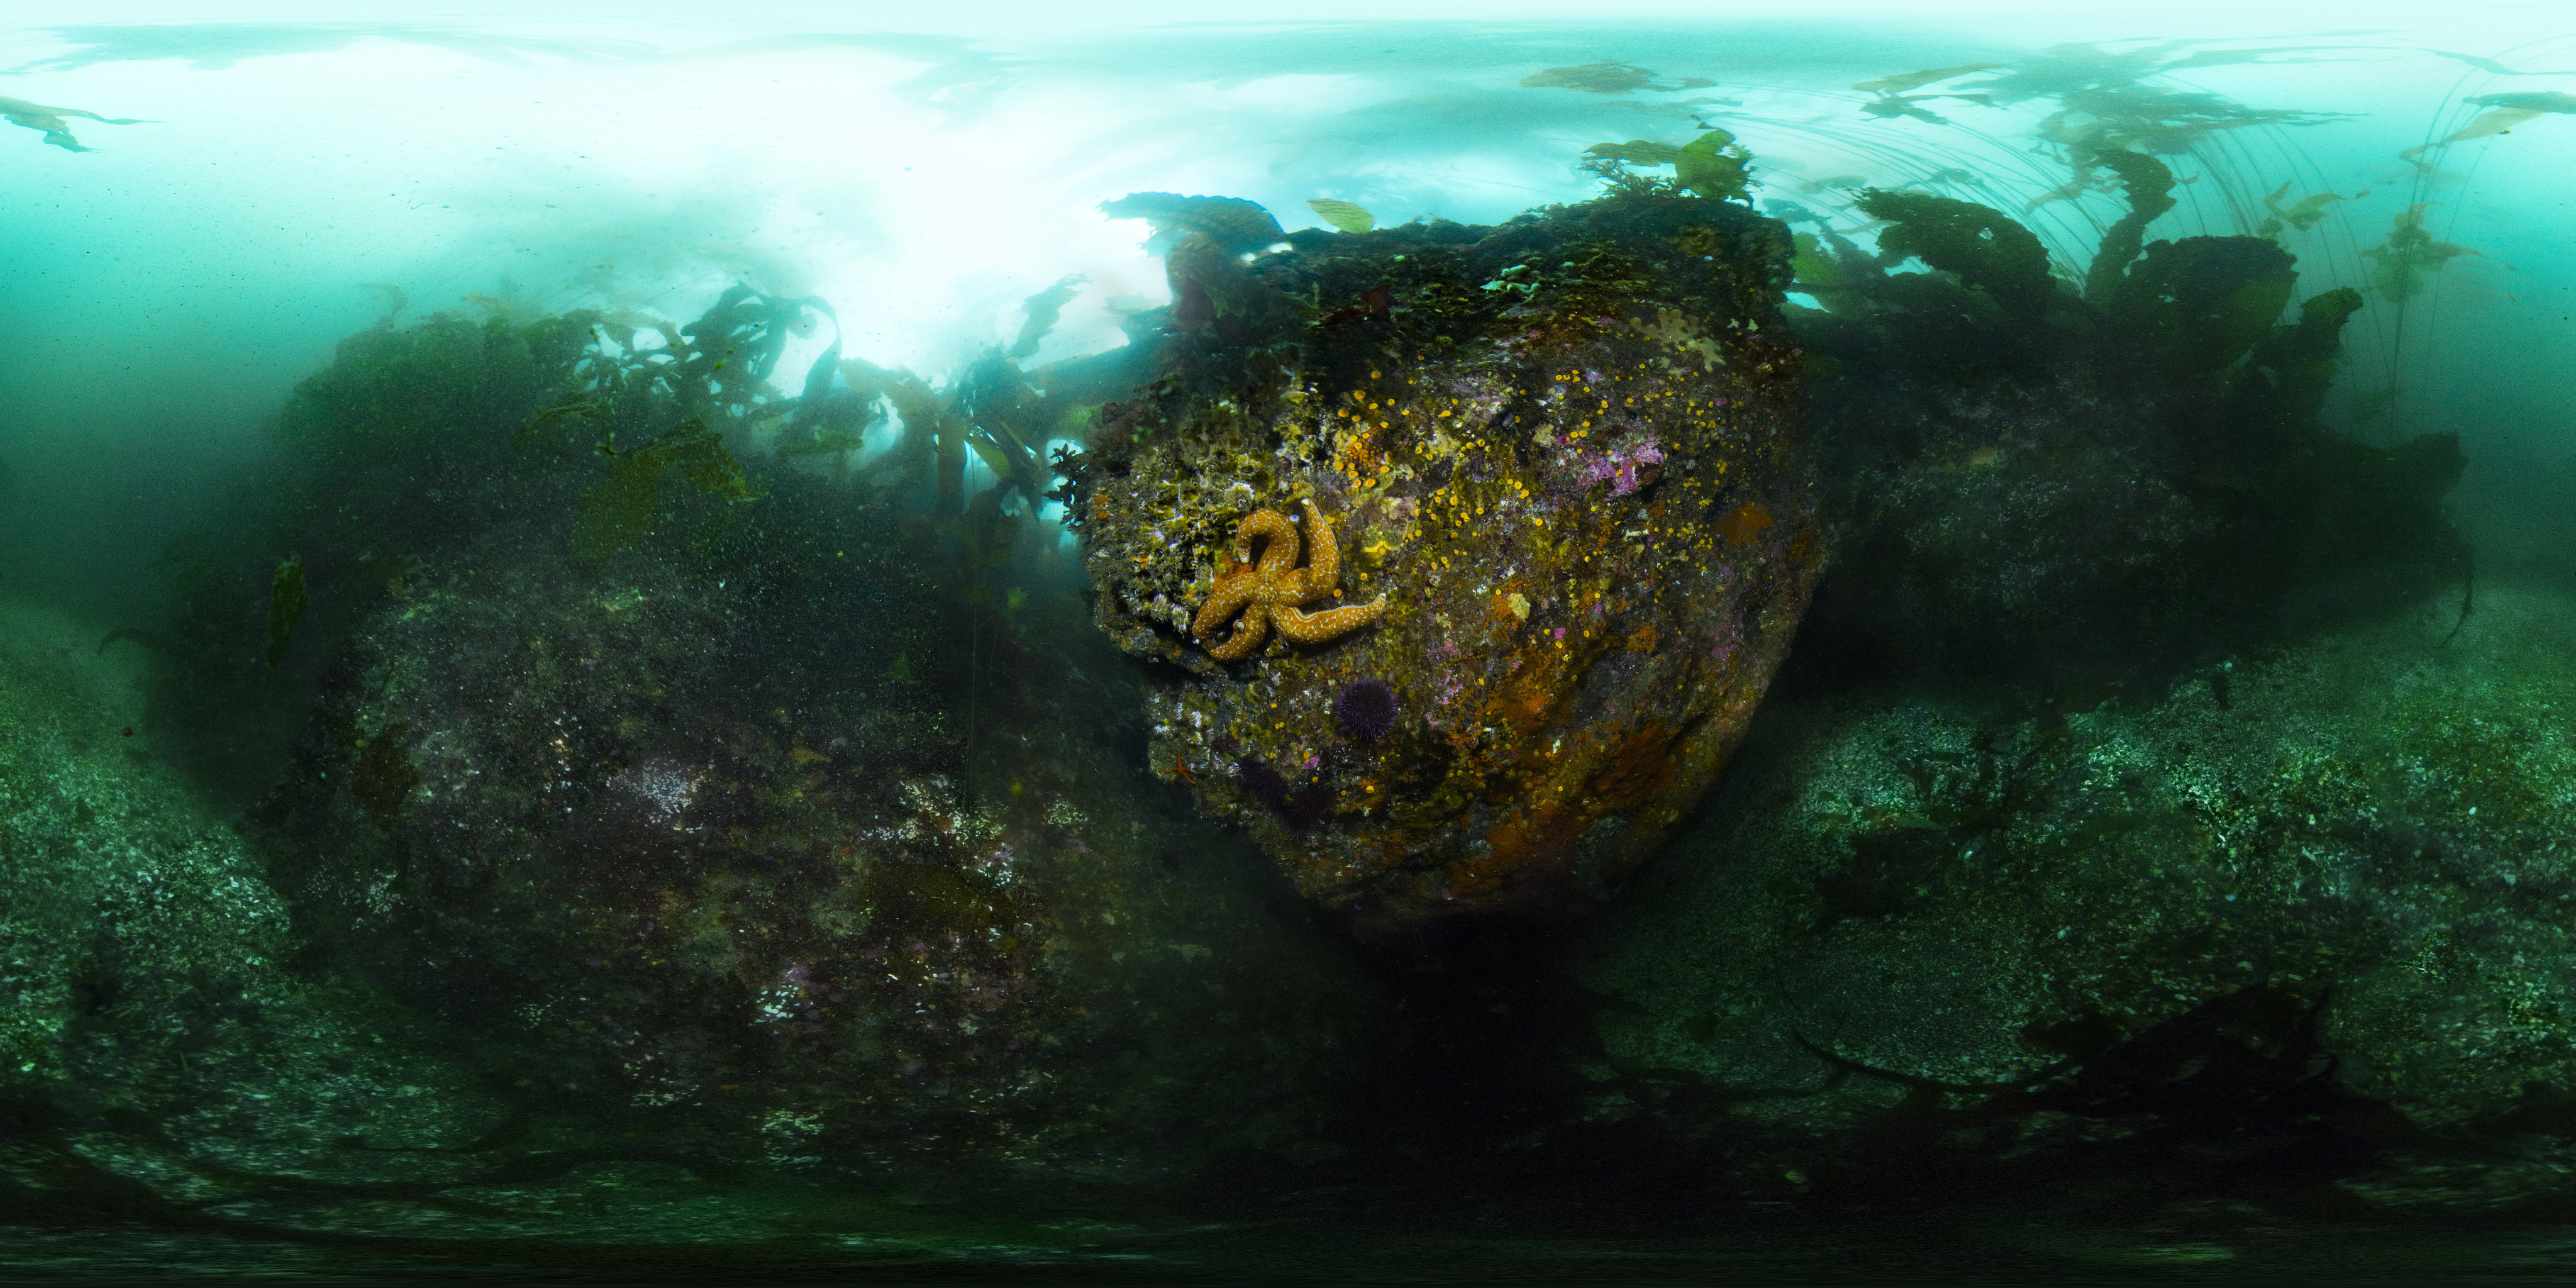 Hard substrate below the kelp canopy hosts a colorful palette of sea stars, sea urchins and cup corals